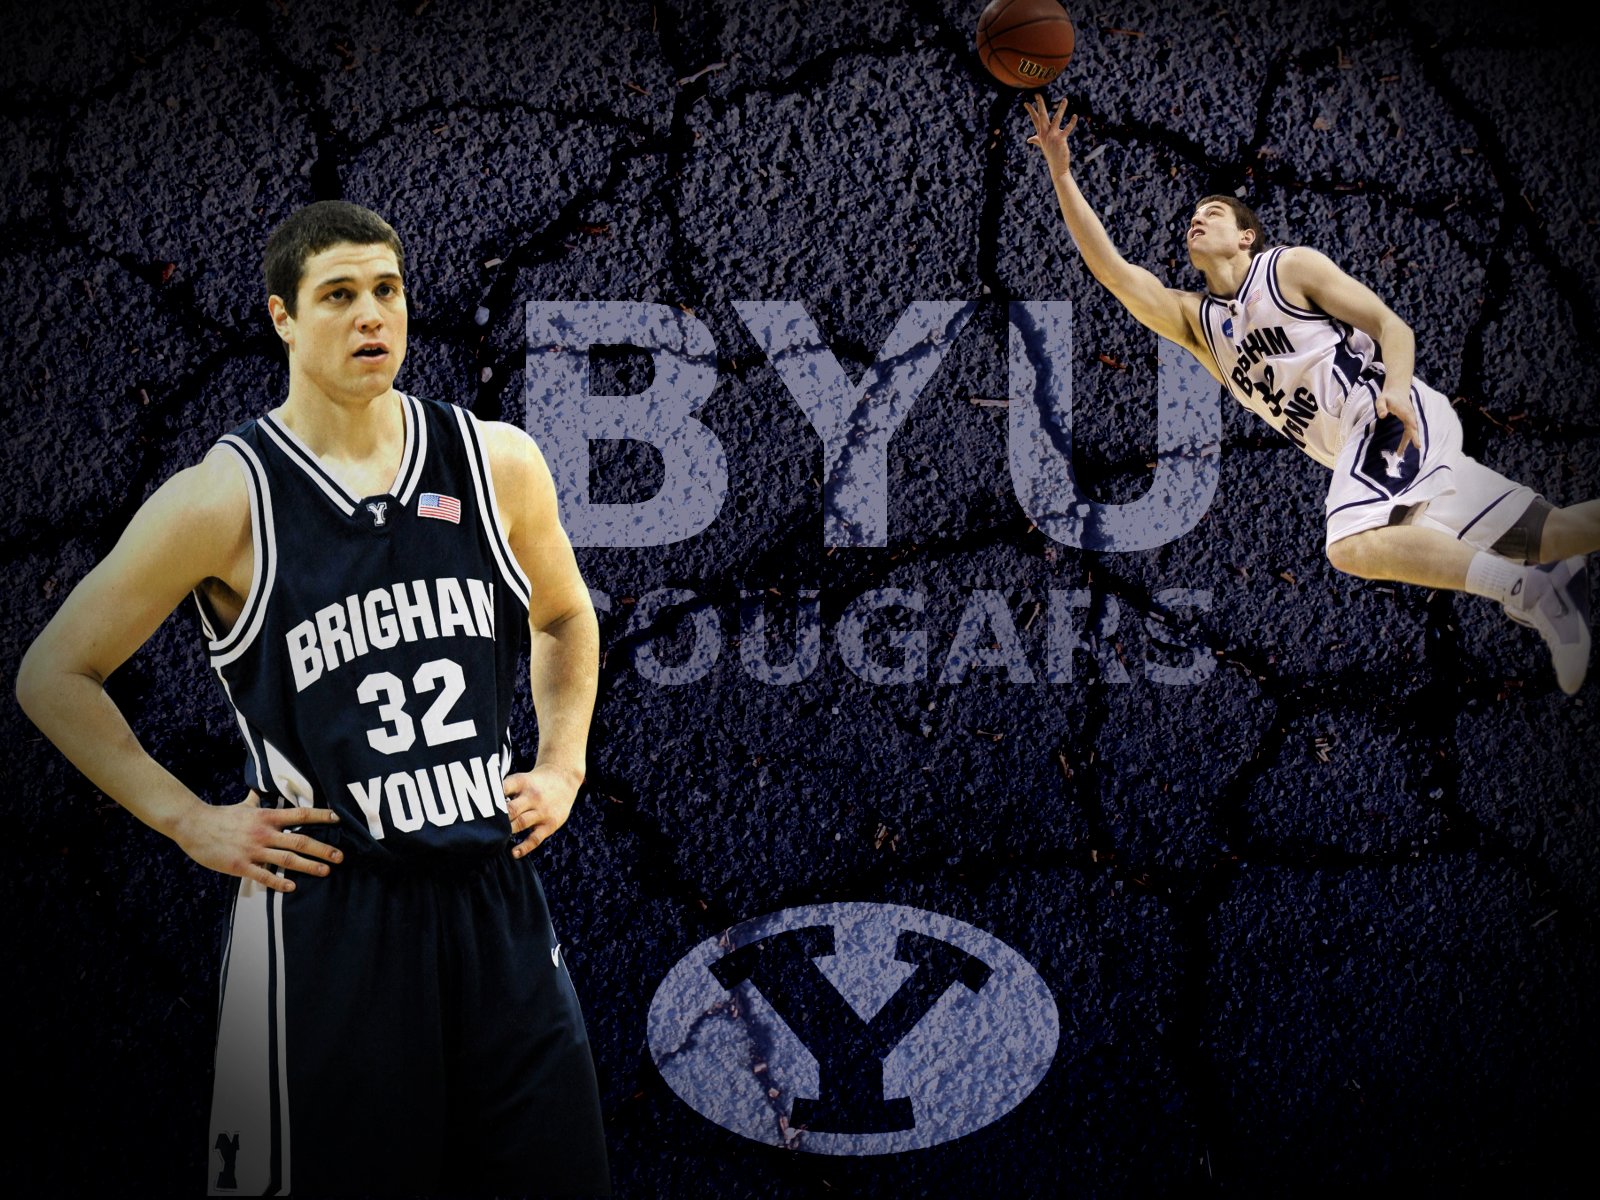 Jimmer Fredette/BYU Basketball Wallpapers - Free, High Quality ...